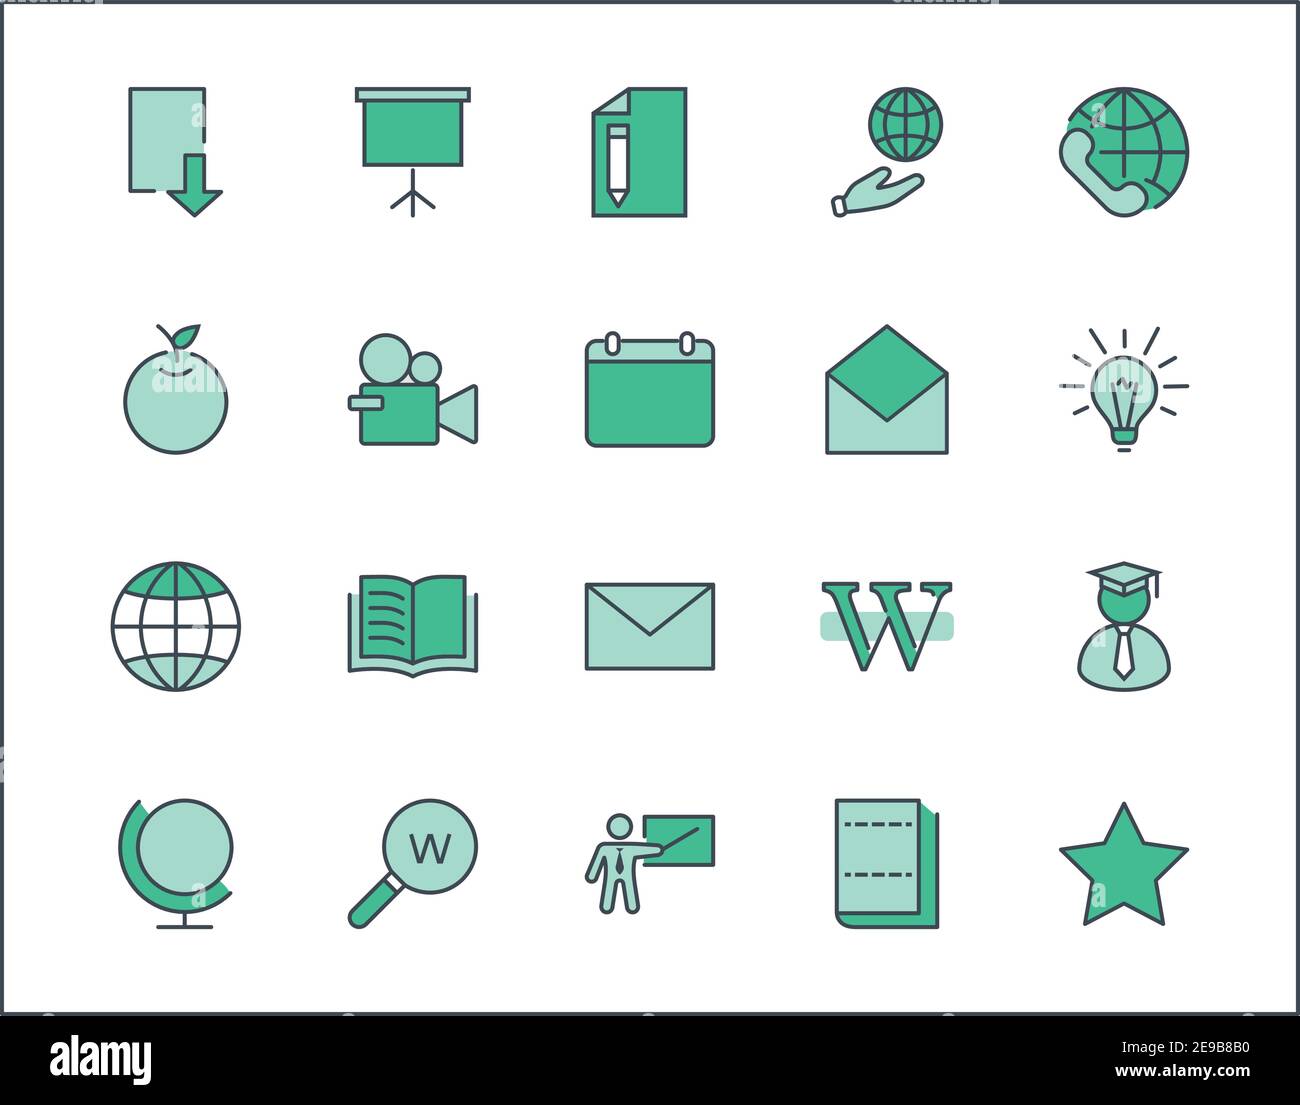 Wikipedia's birthday Set Line Vector Icon. Contains such Icons as Wikipedia, Open Book, Teacher, Blackboard, Pointer, Web Globe, Directory, Search Stock Vector